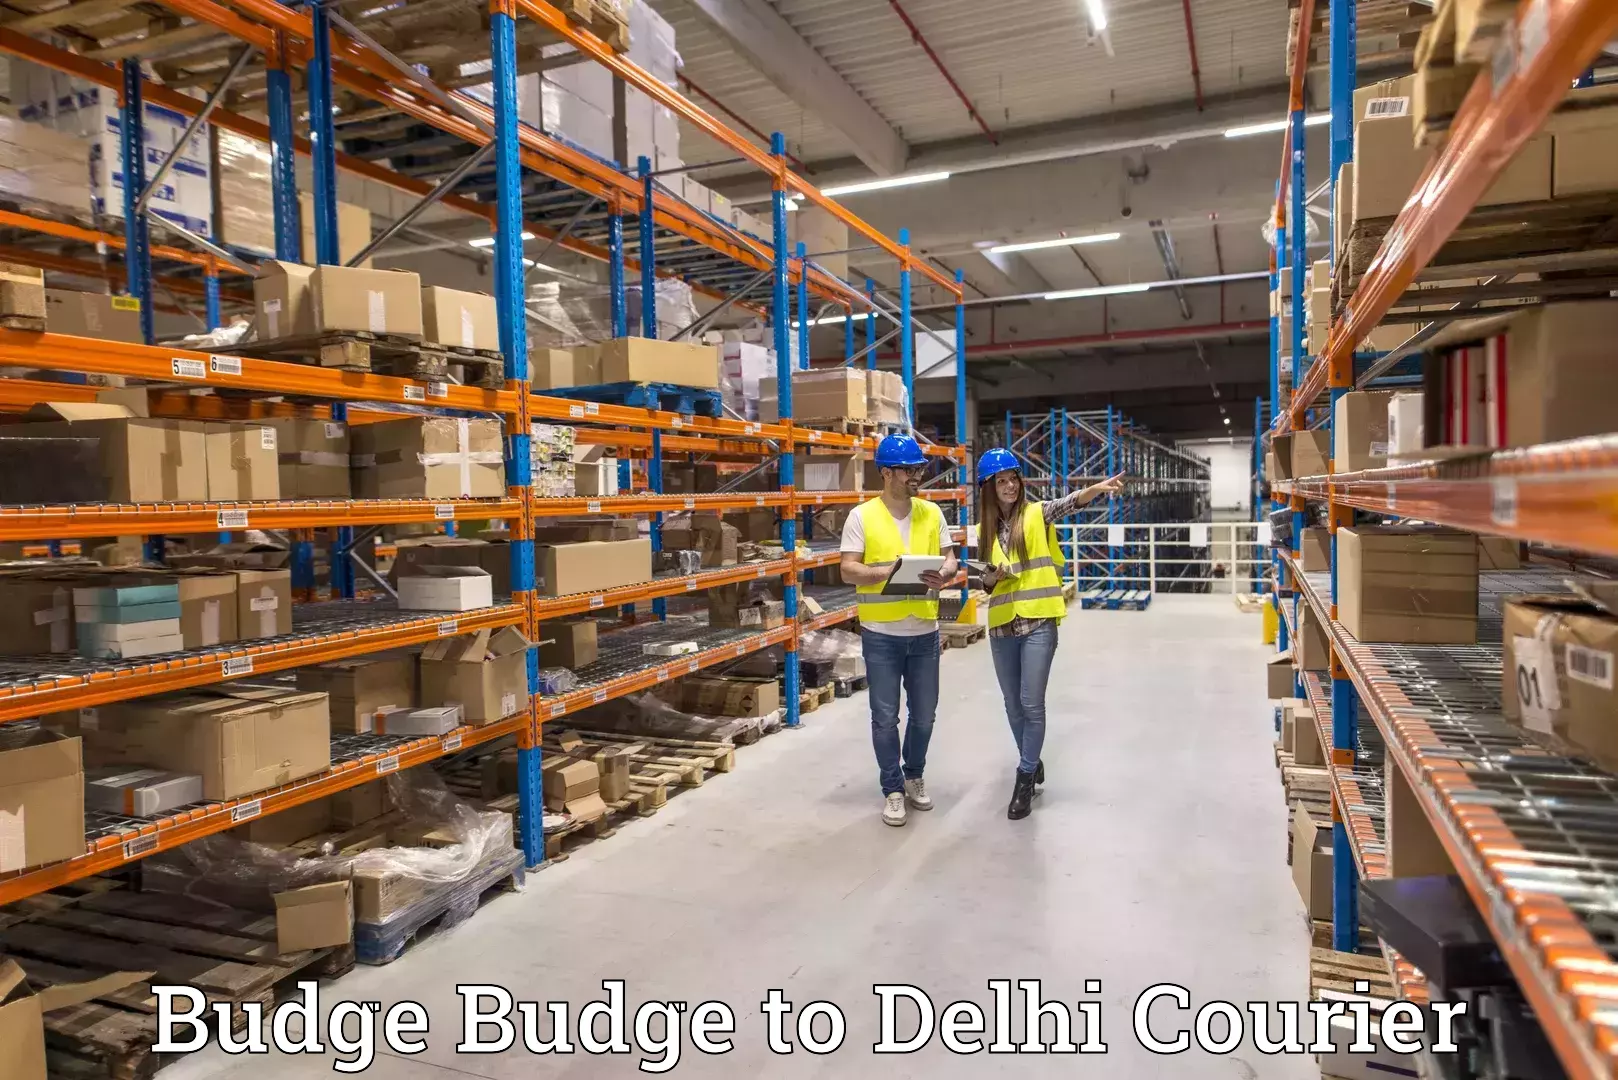 Parcel service for businesses Budge Budge to NCR